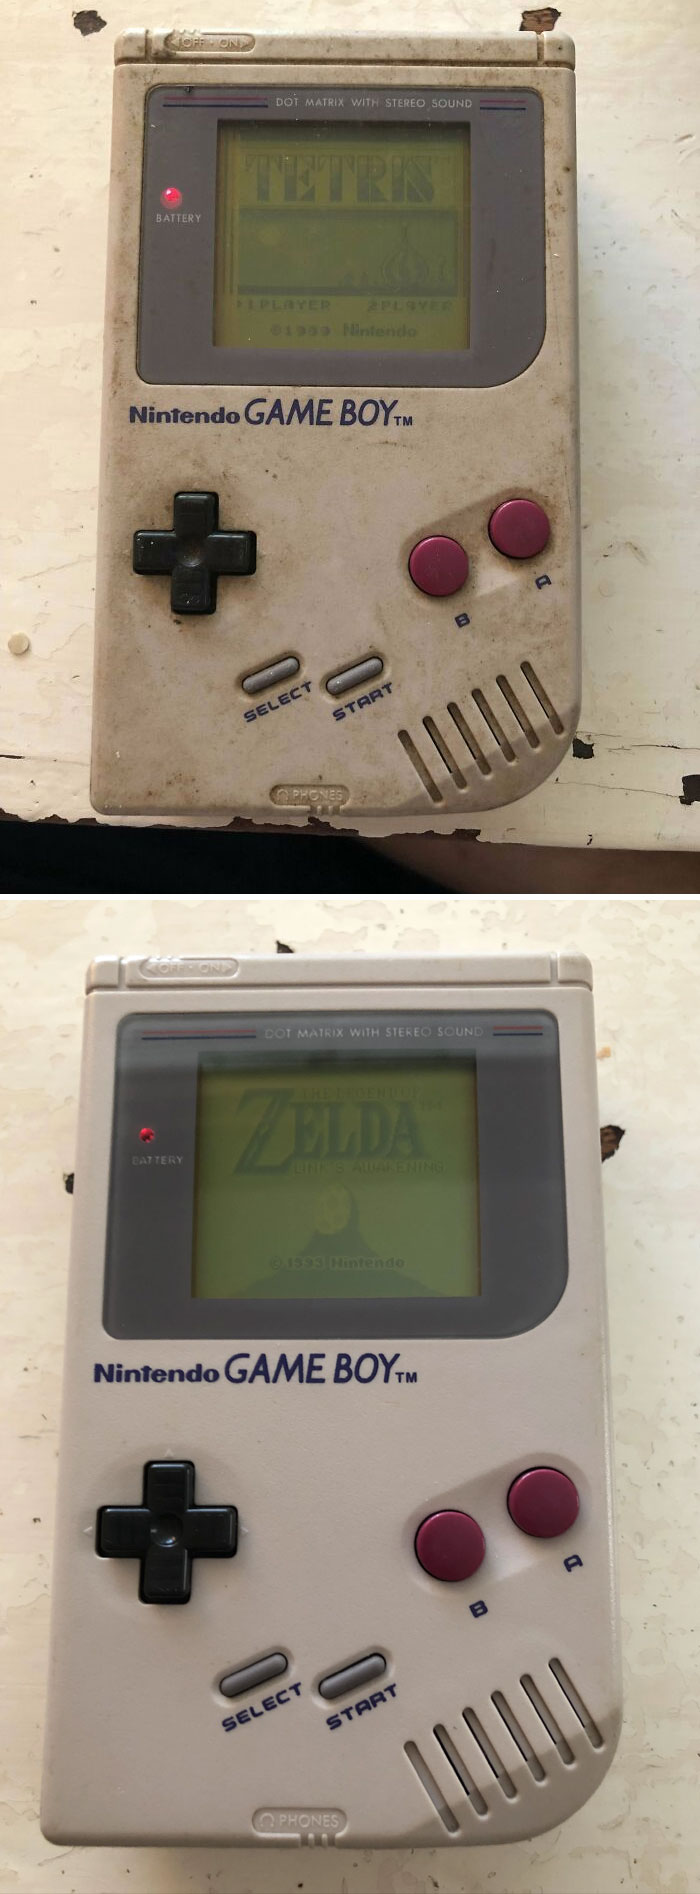 I Did My First Refurbish. The Gameboy Was Reduced From A Hoarder's House Set To Be Demolished